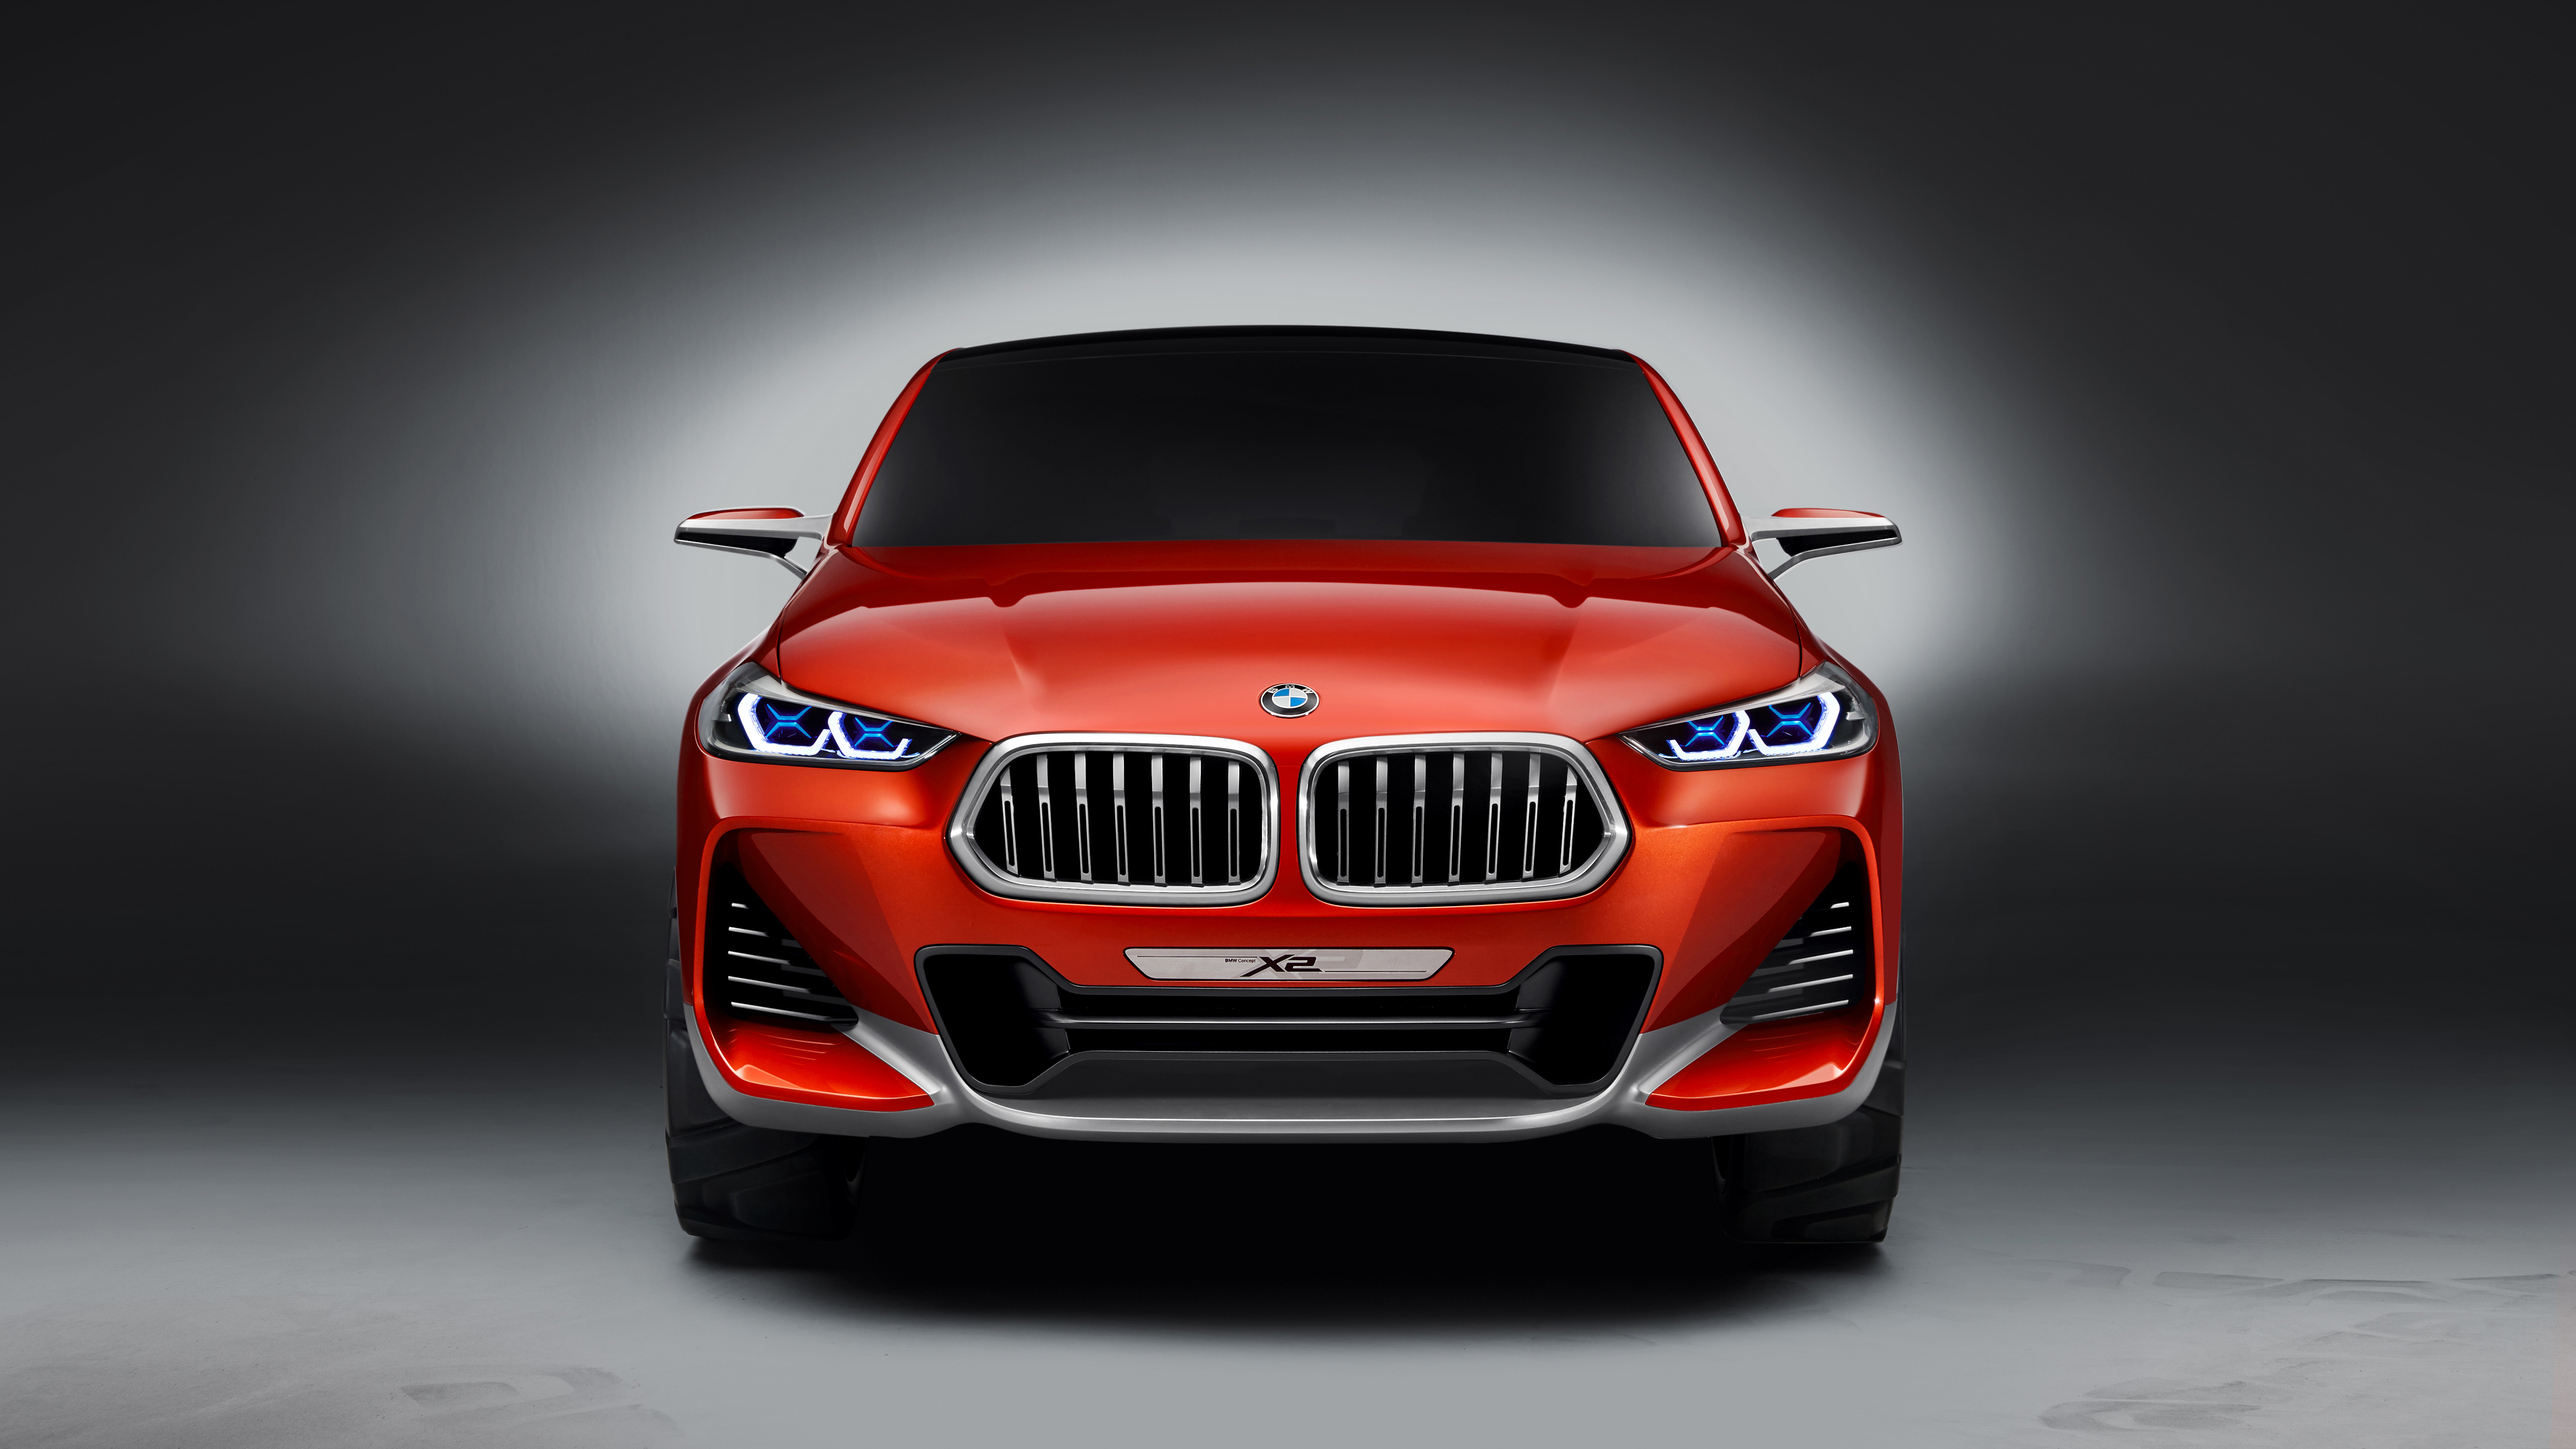 2018 Bmw X2 Concept Car, HD Cars, 4k Wallpapers, Images, Backgrounds, Photos  and Pictures